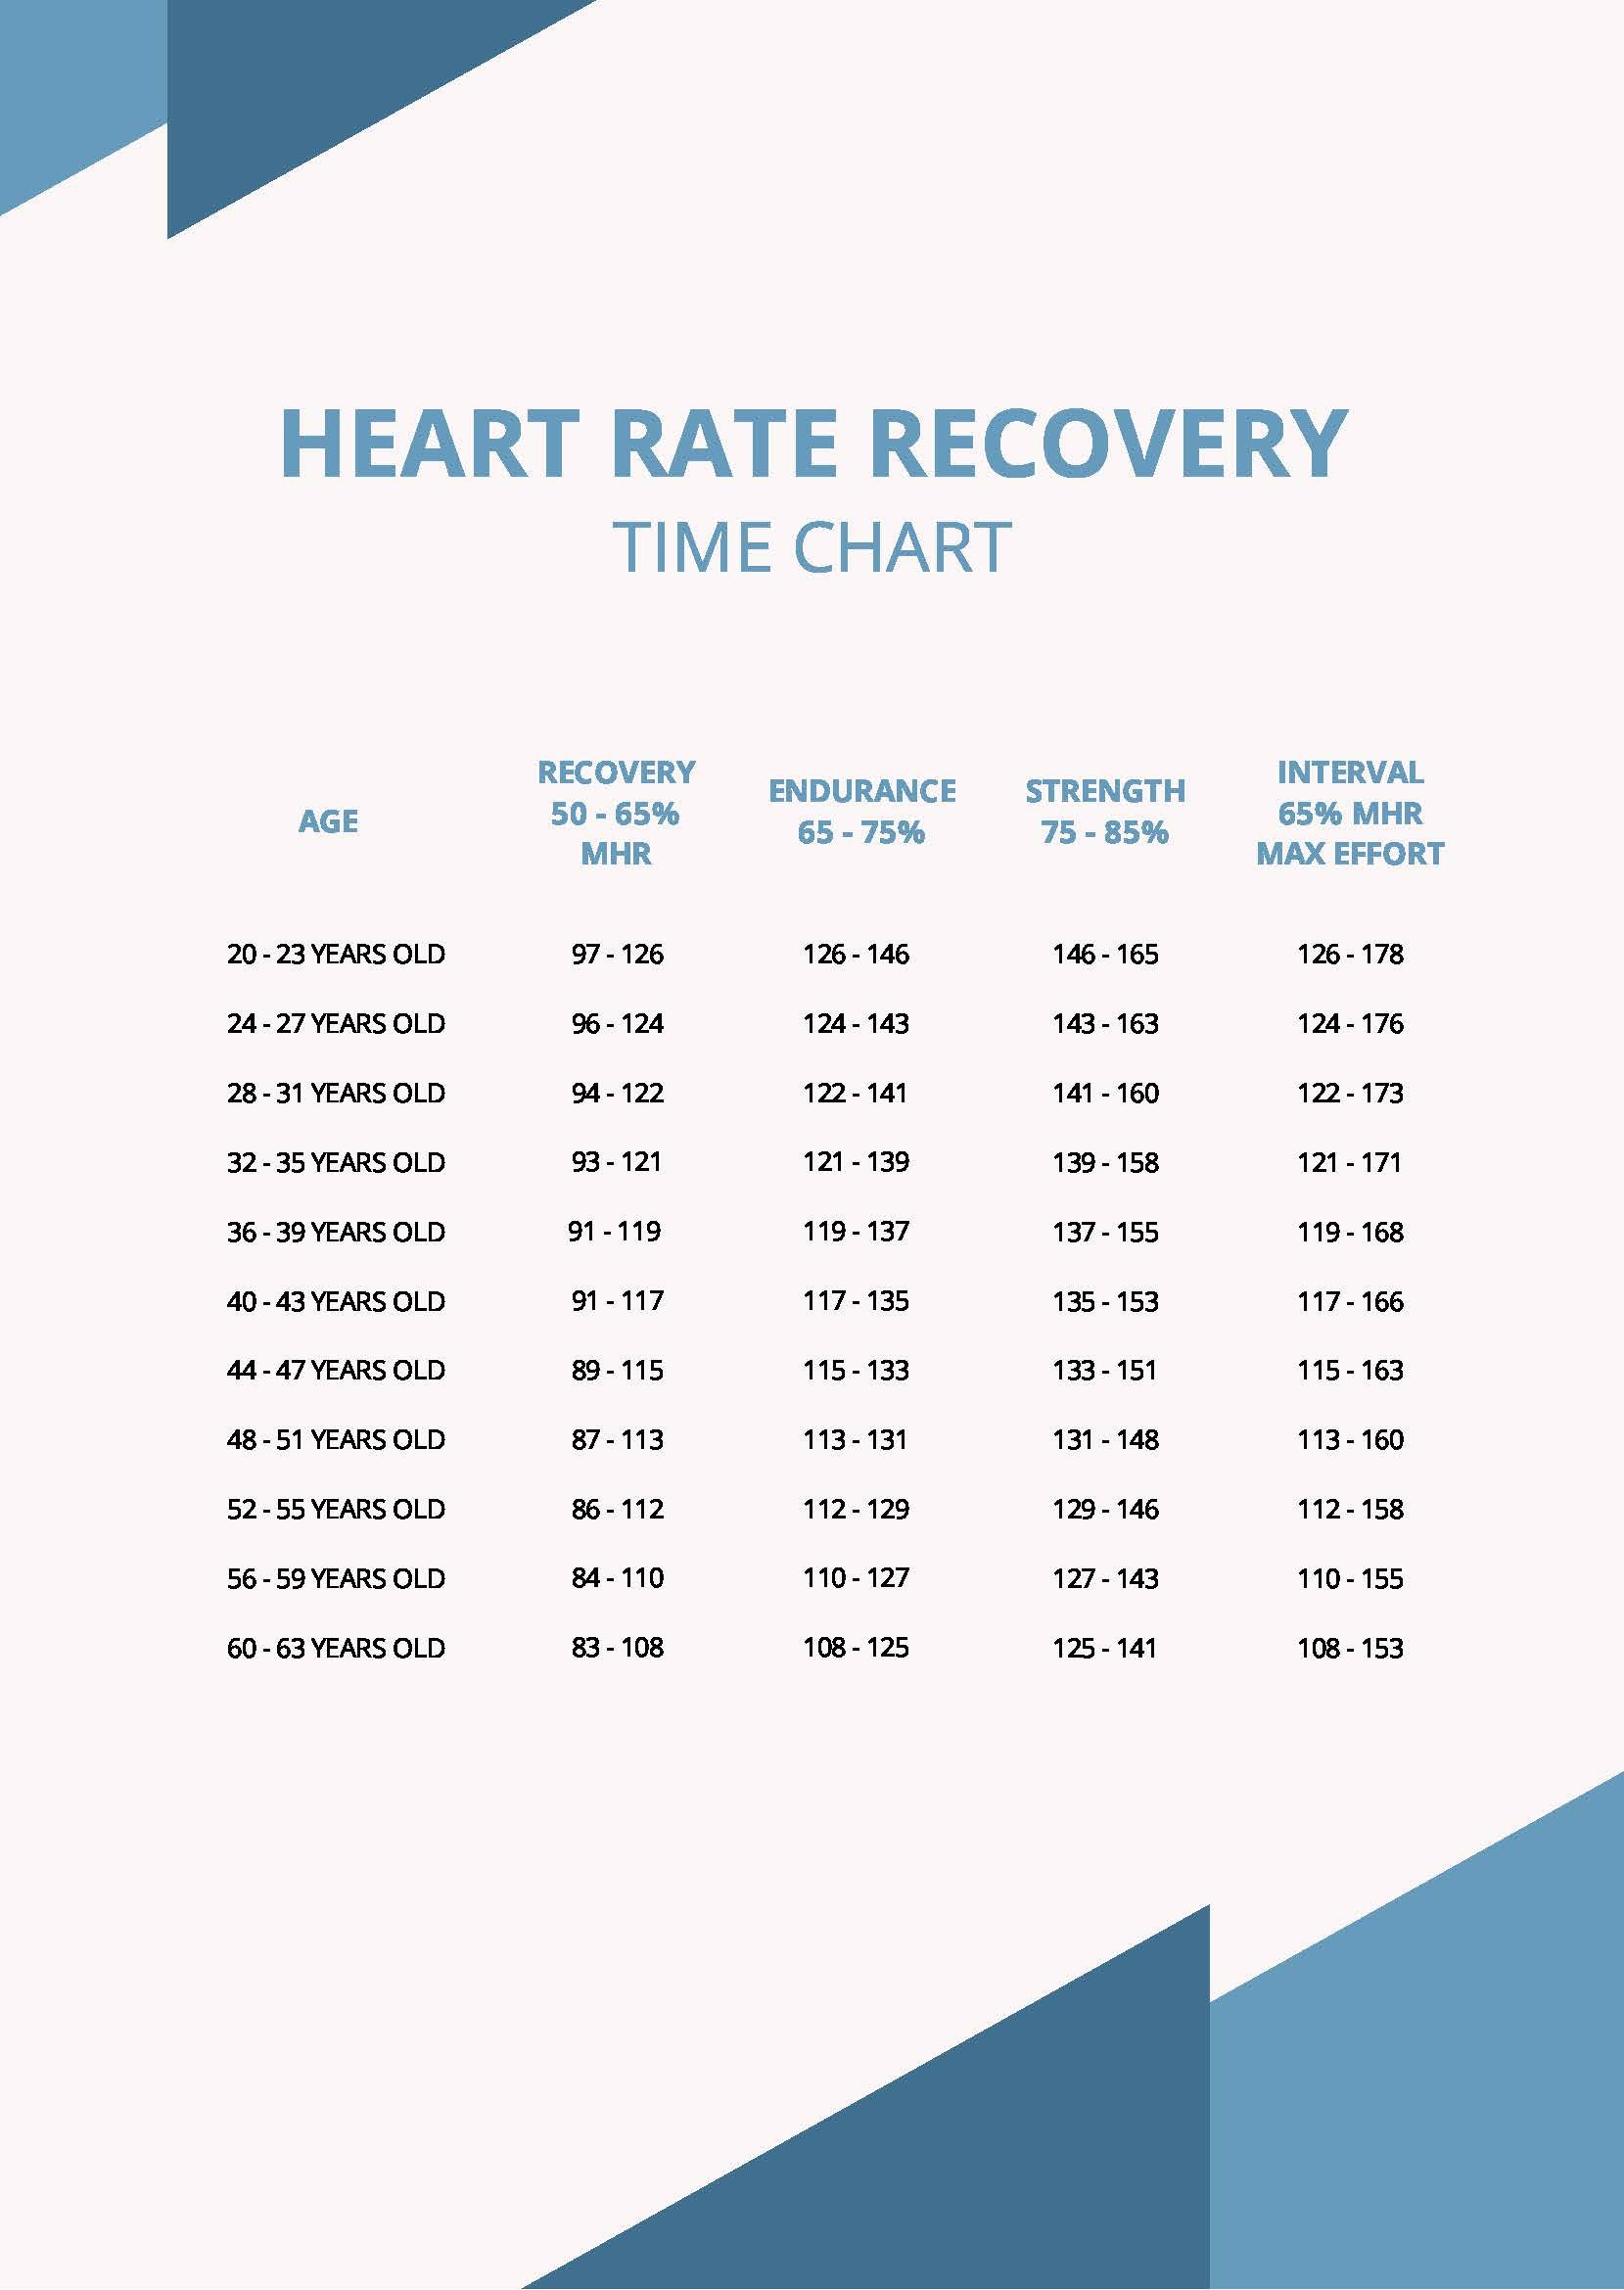 Heart Rate Recovery Time Chart in PDF - Download